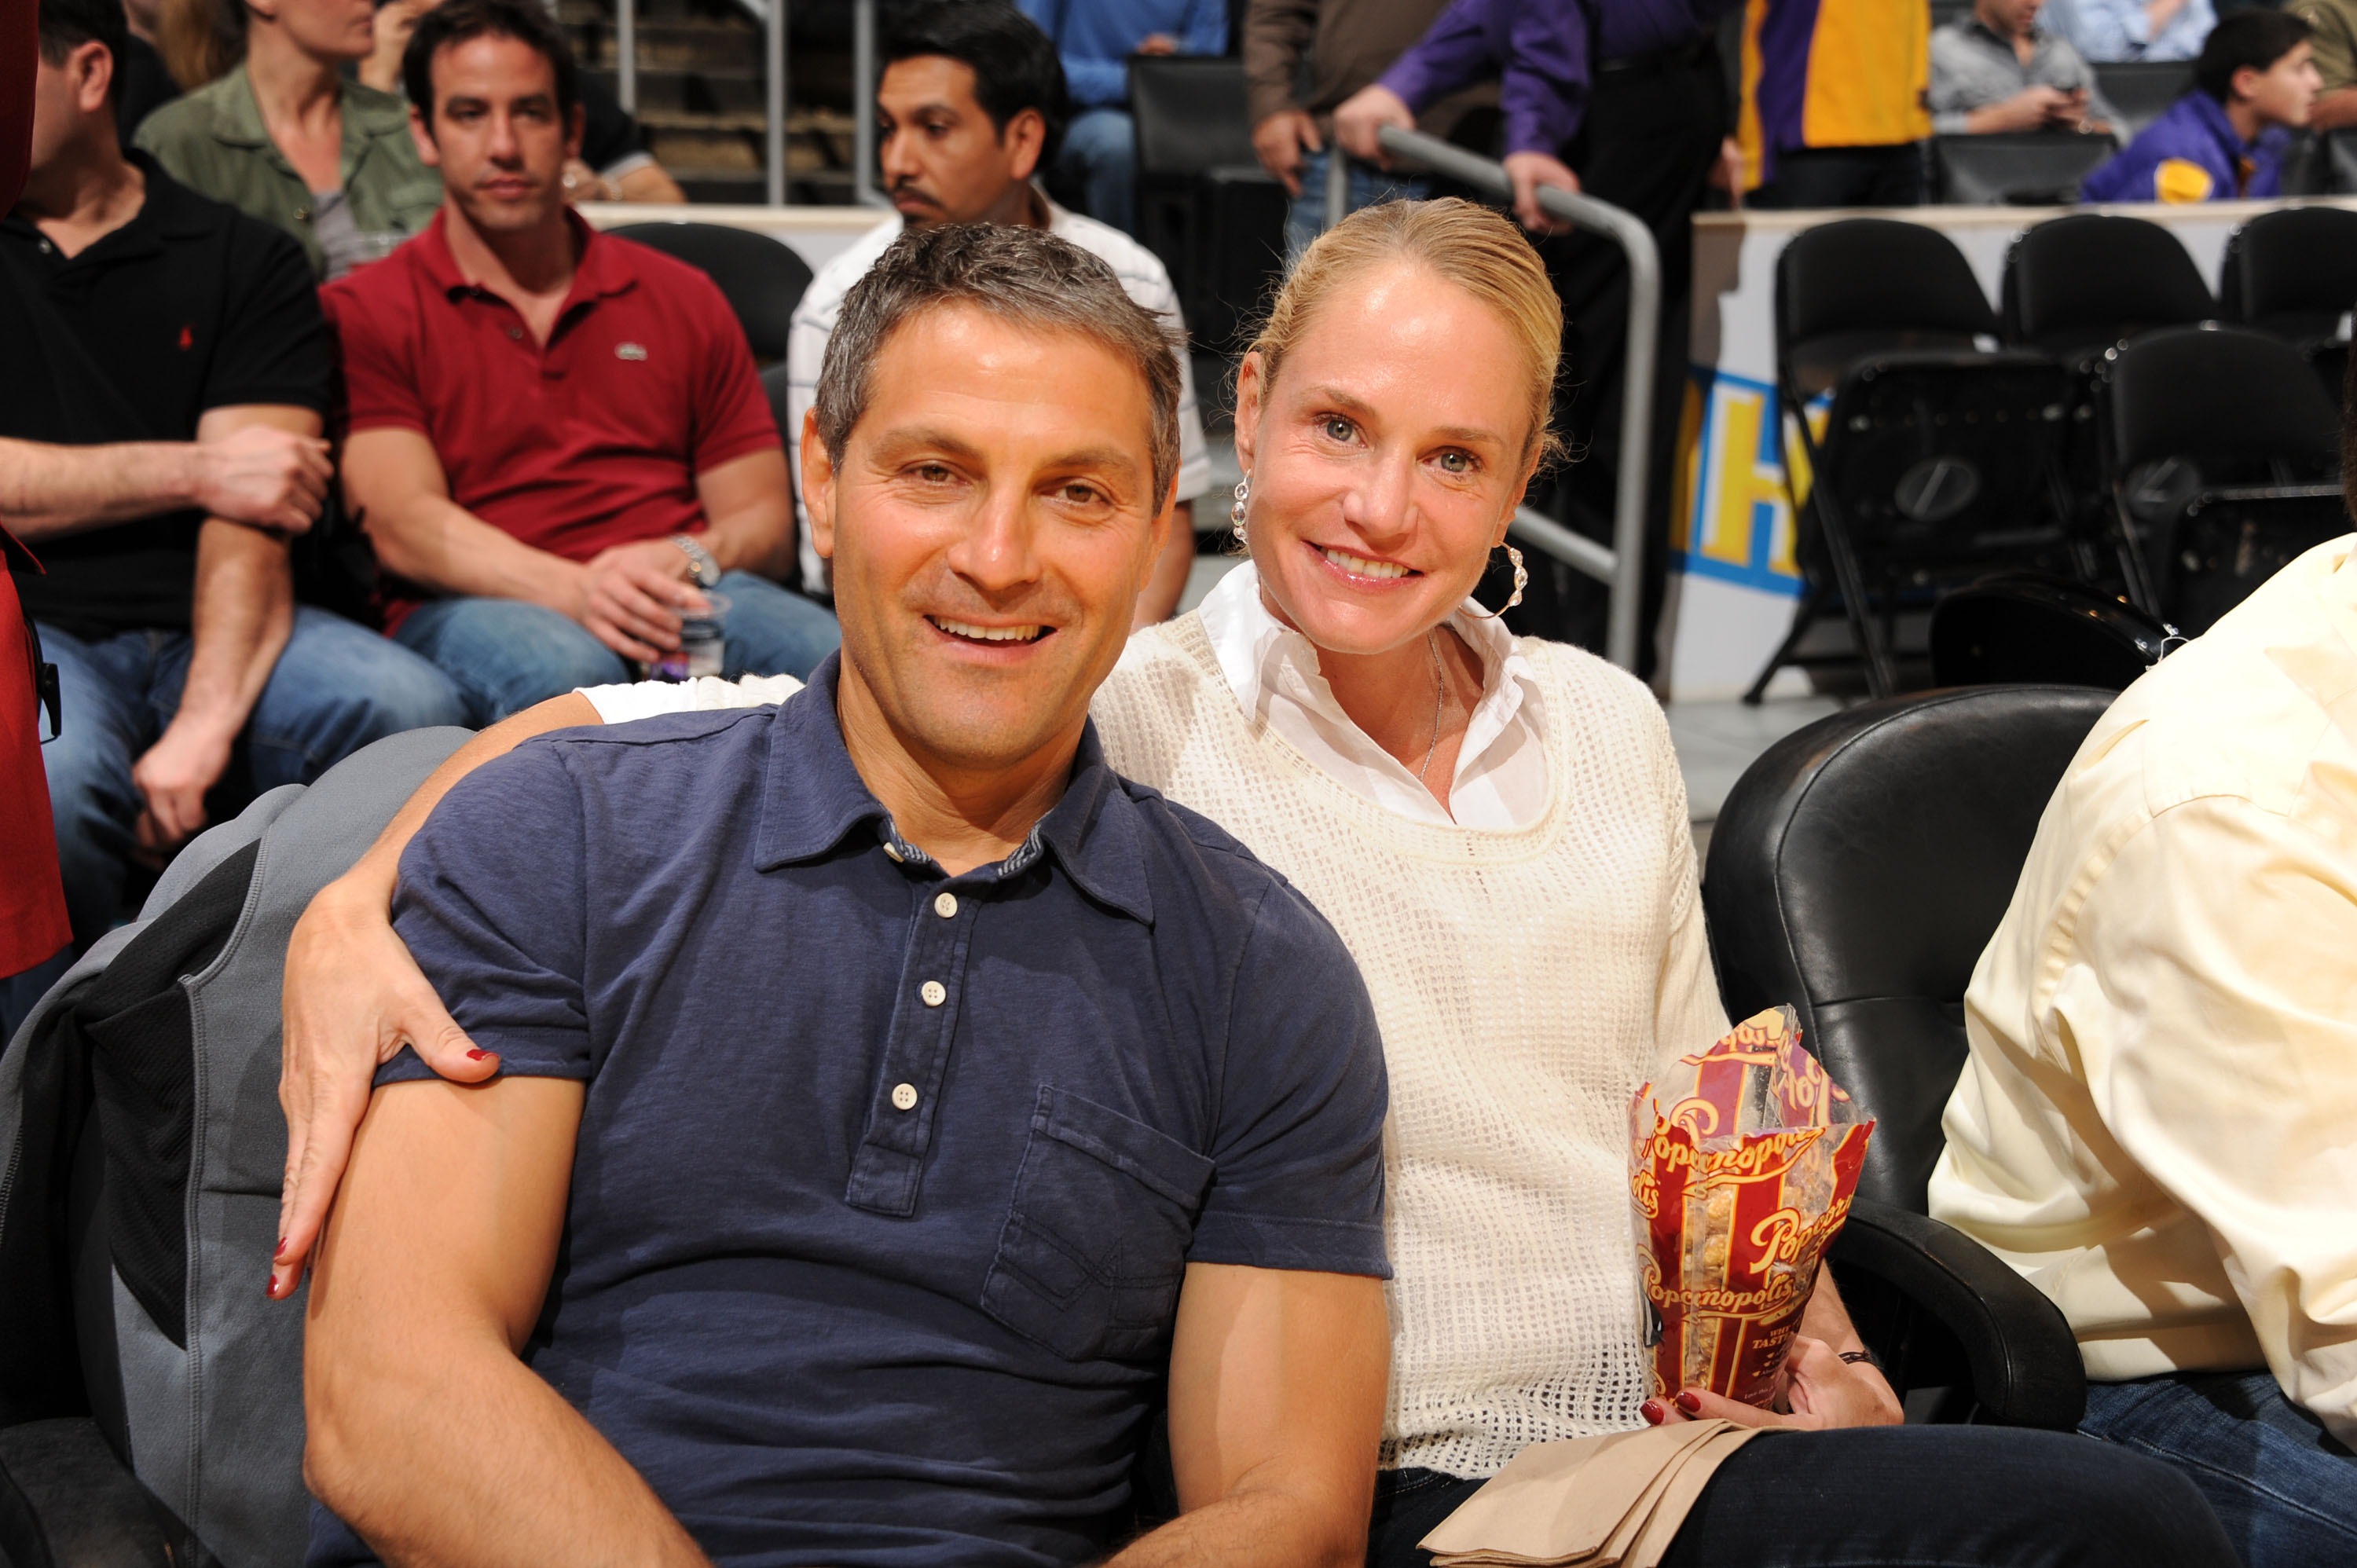 Ari Emanuel and Sarah Addington attend a game between the Oklahoma City Thunder and the Los Angeles Lakers at Staples Center on January 17, 2011, in Los Angeles, California. | Source: Getty Images